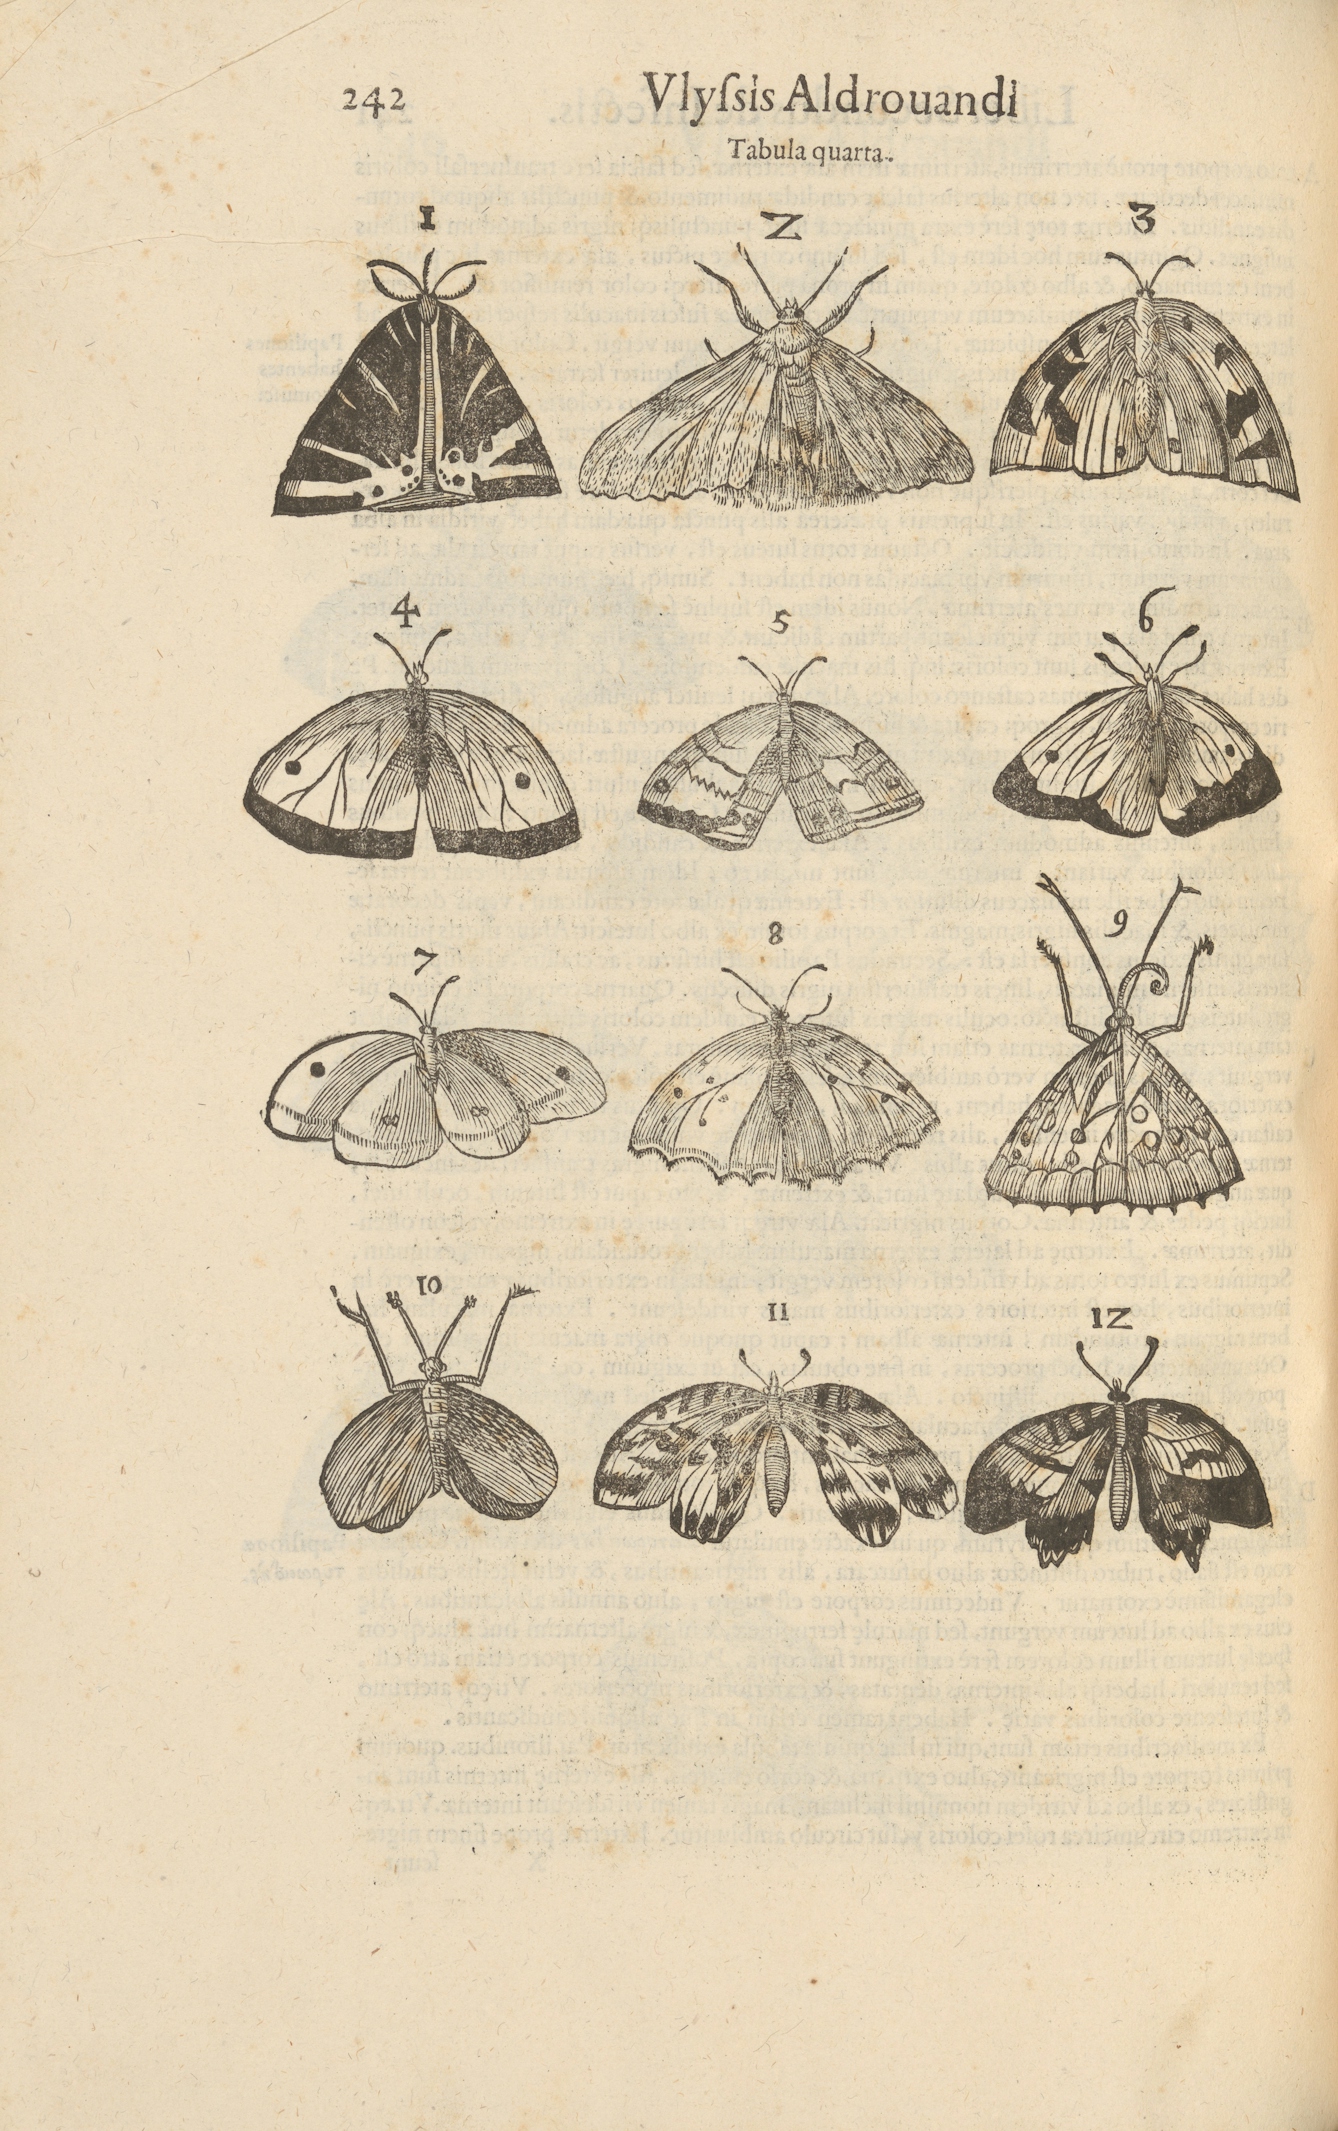 Photograph of woodcut illustrations in a 17th century early printed book, depicting a series of winged insects.